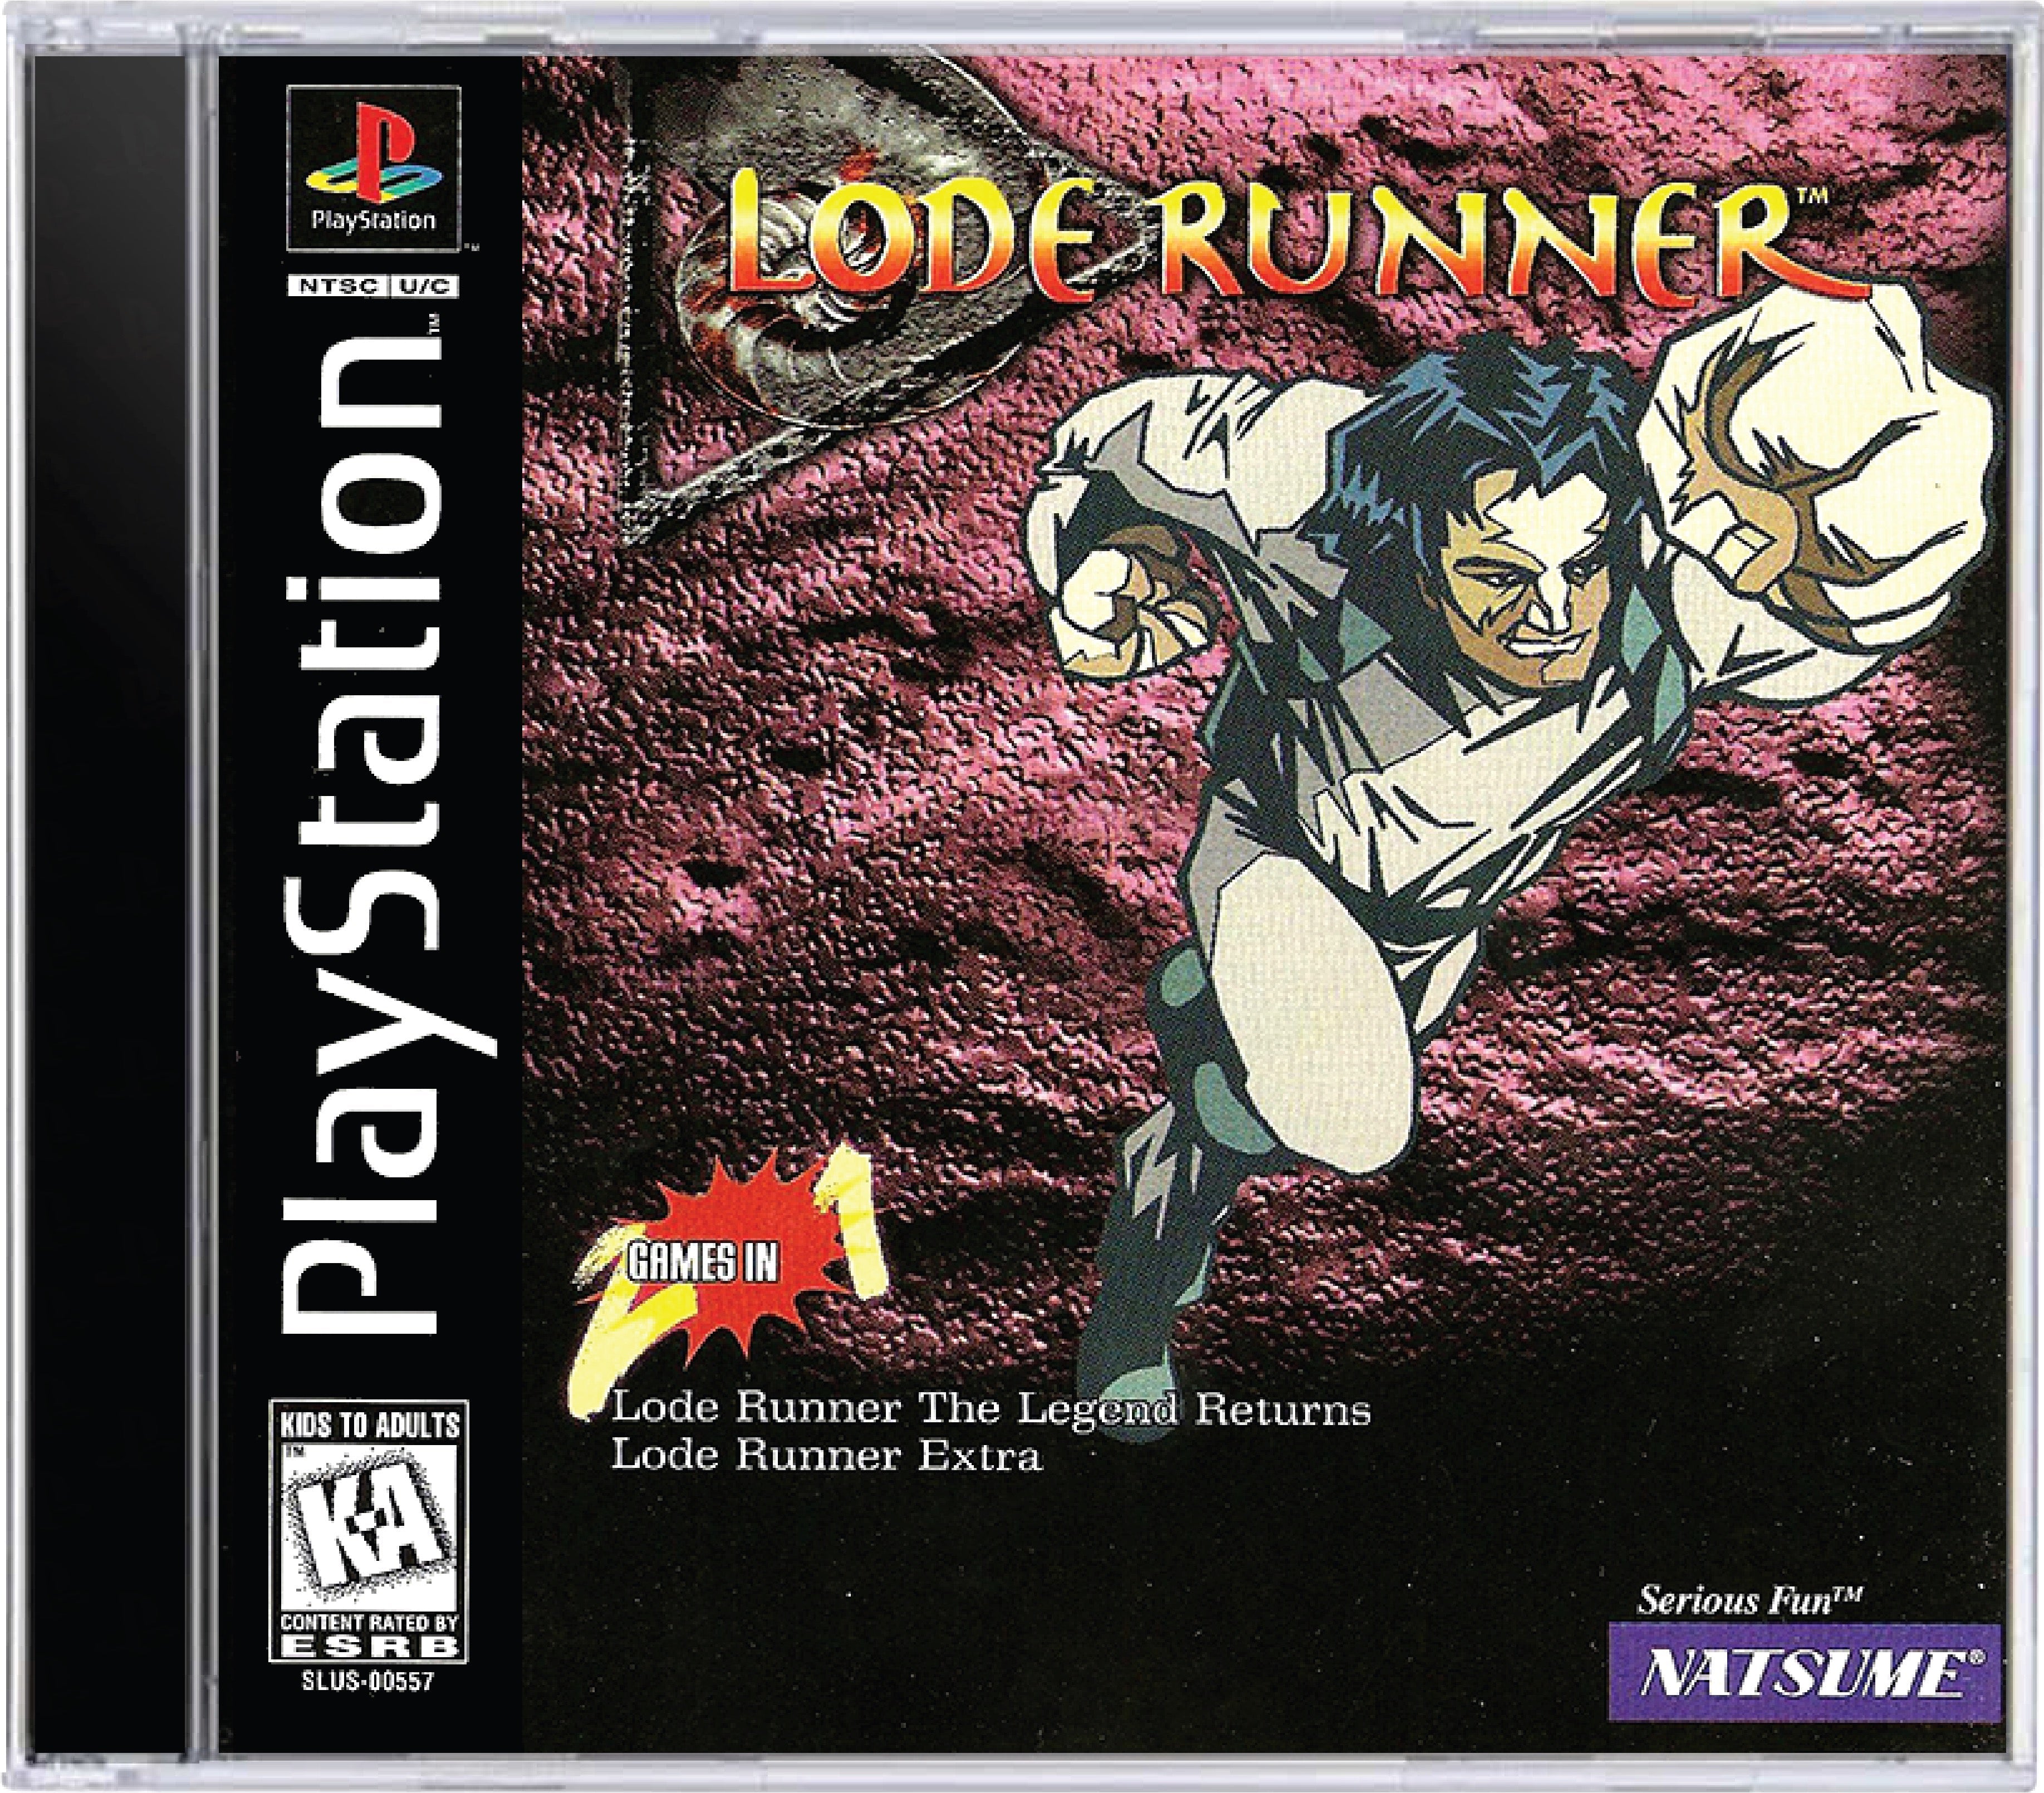 Lode Runner The Legend Returns Cover Art and Product Photo